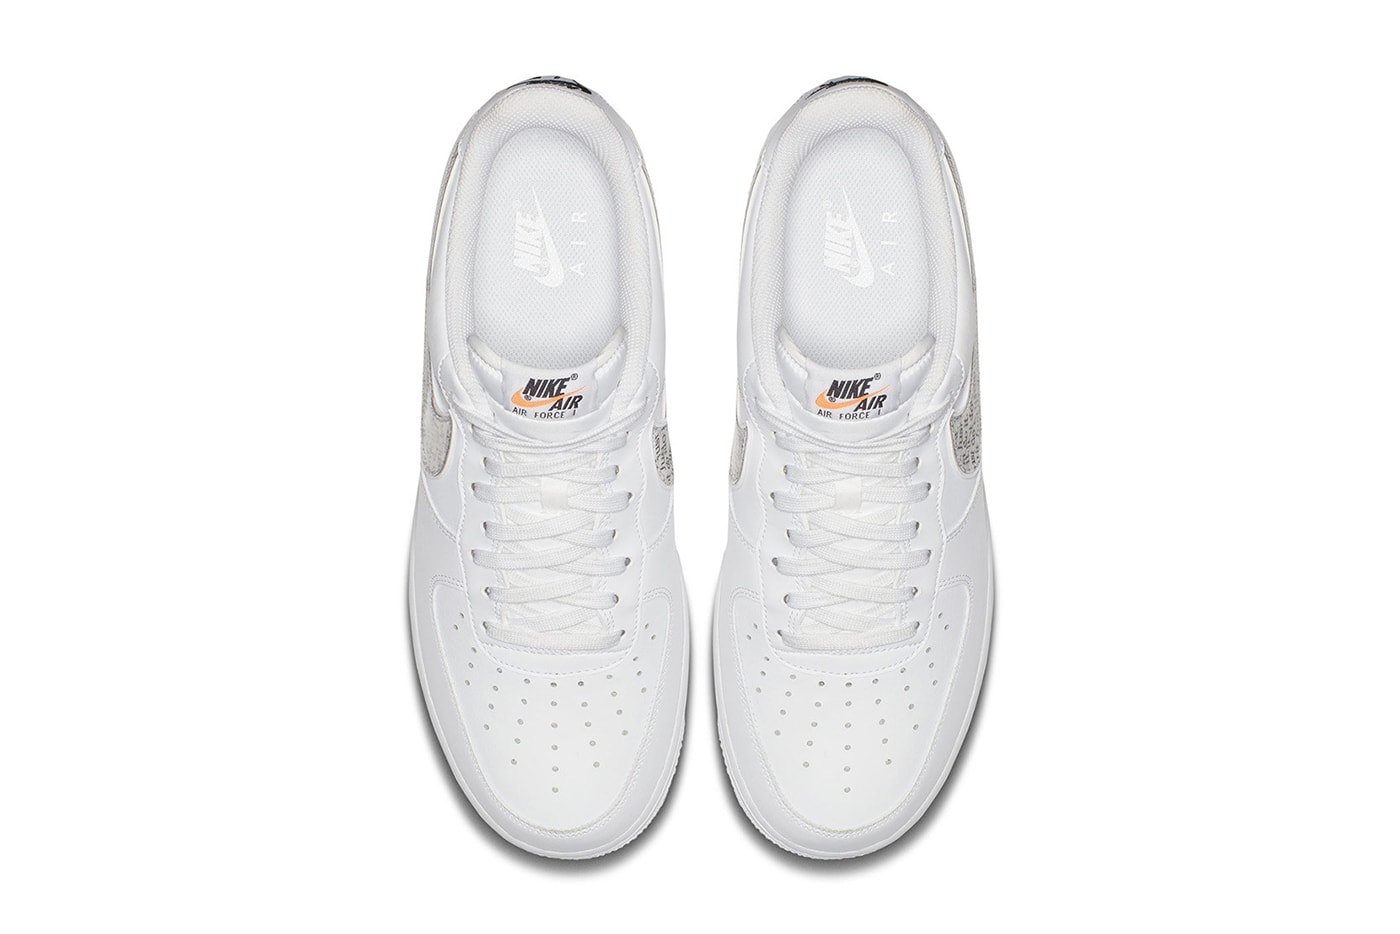 Nike Air Force 1 Low Just Do It pack white leather footwear sneakers